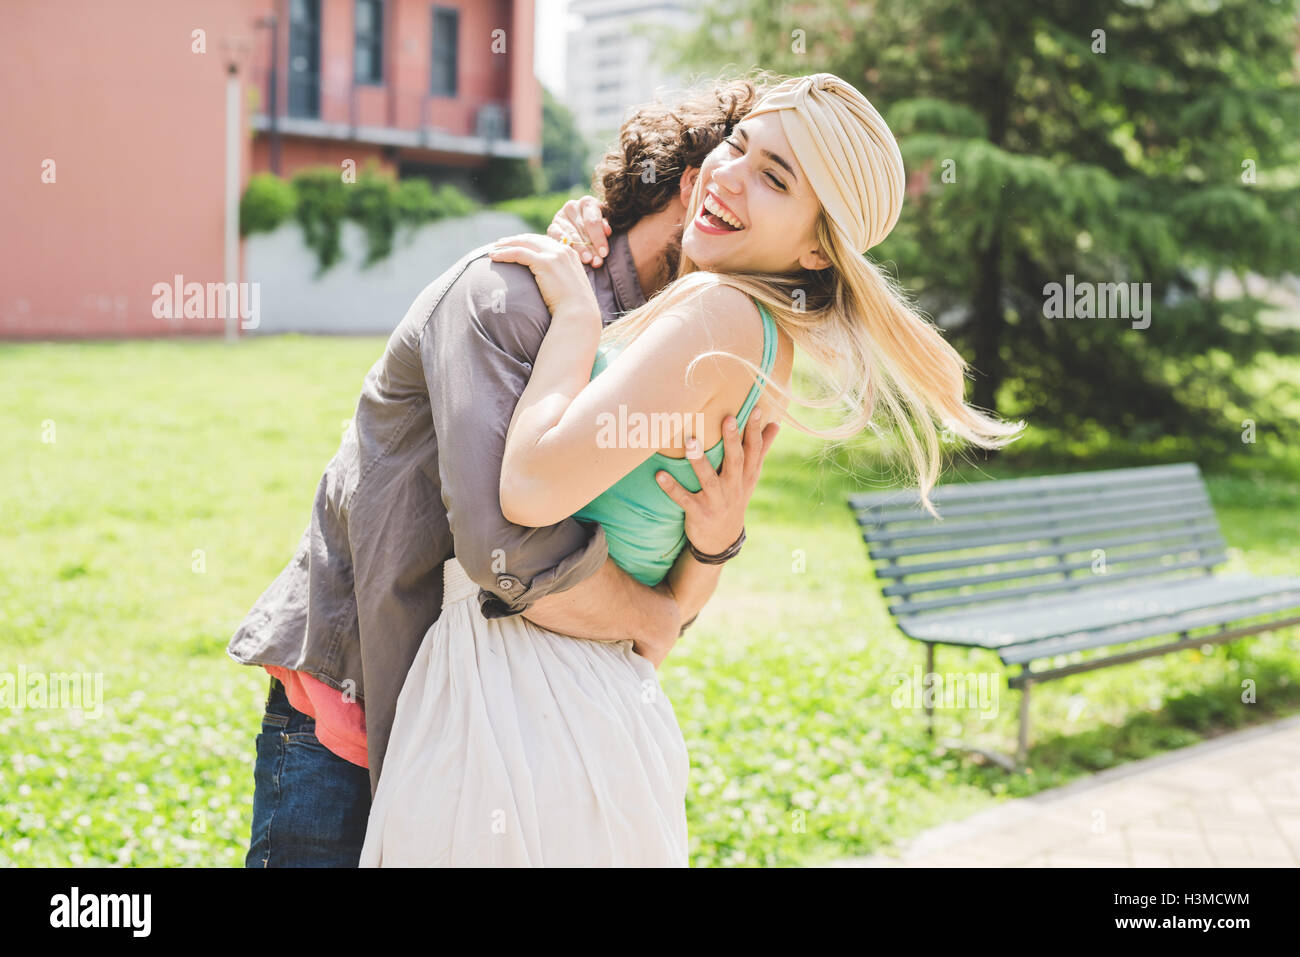 Couple hugging in park Banque D'Images